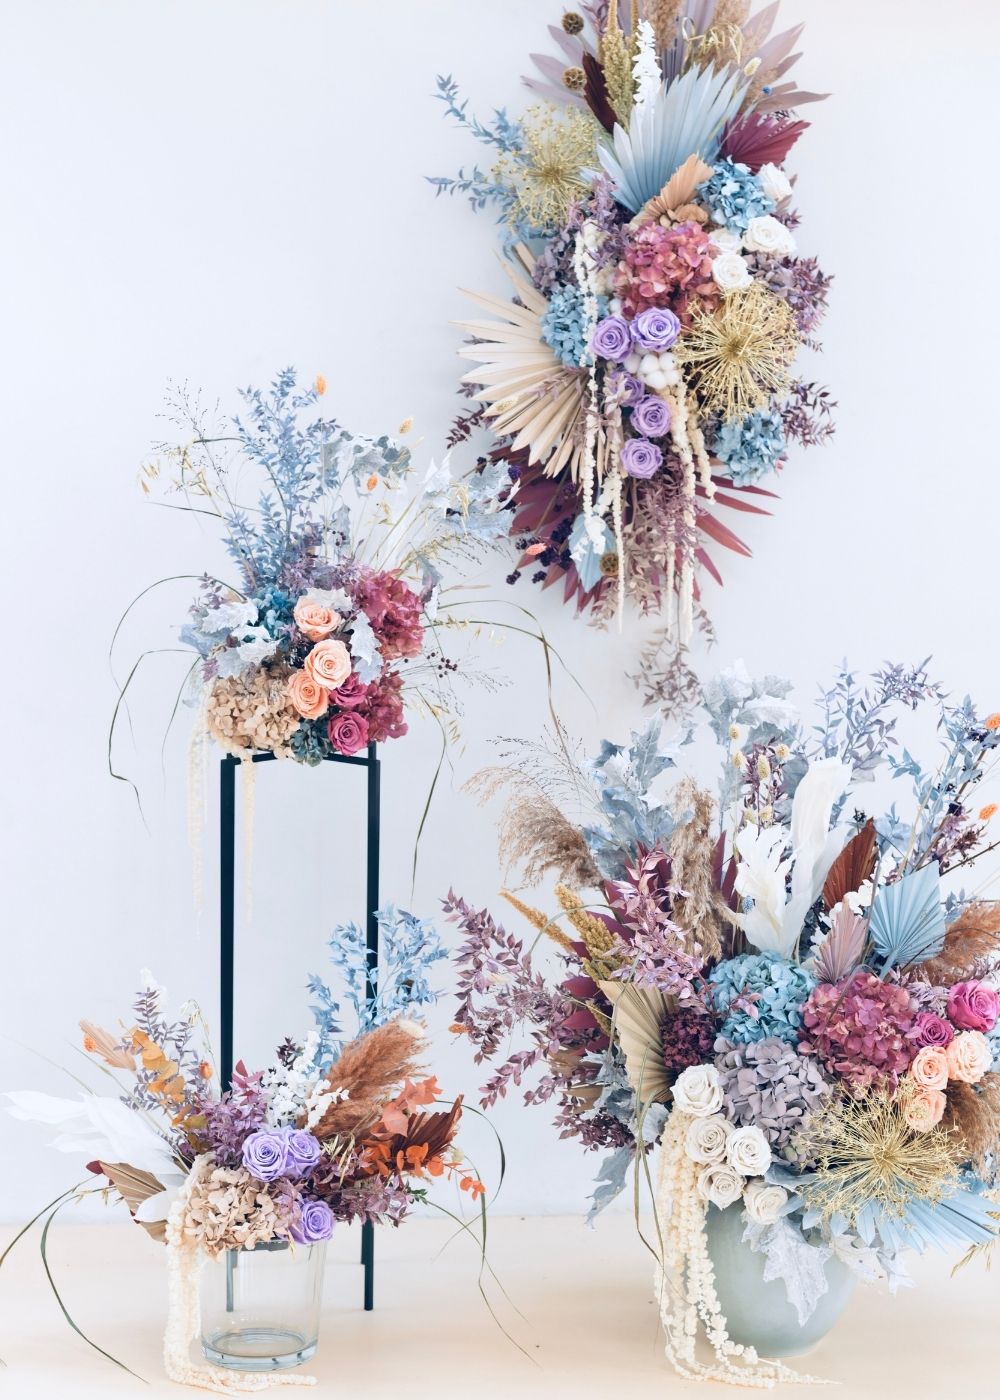 Dried flowers - floral dry designs by Katya Hutter - On Thursd.